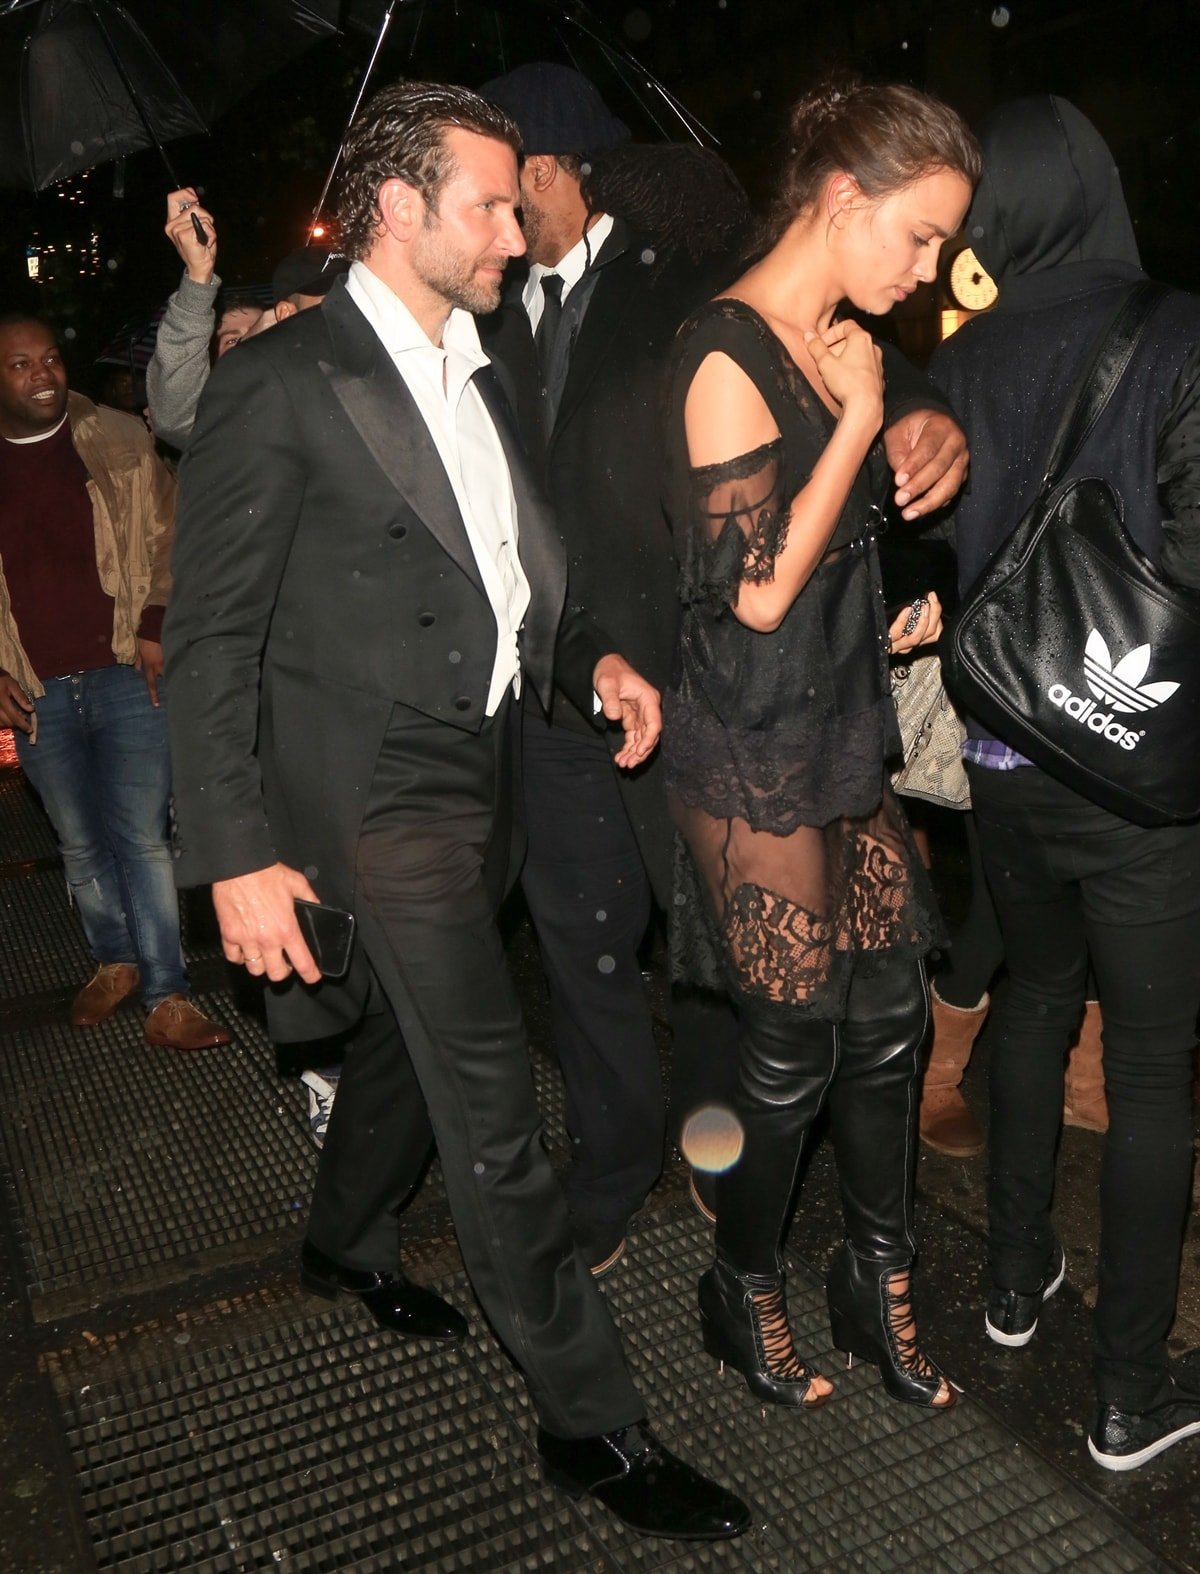 Bradley Cooper in a Tom Ford suit and Irina Shayk in a Givenchy outfit make their way into Up & Down nightclub after attending the 2016 Met Gala